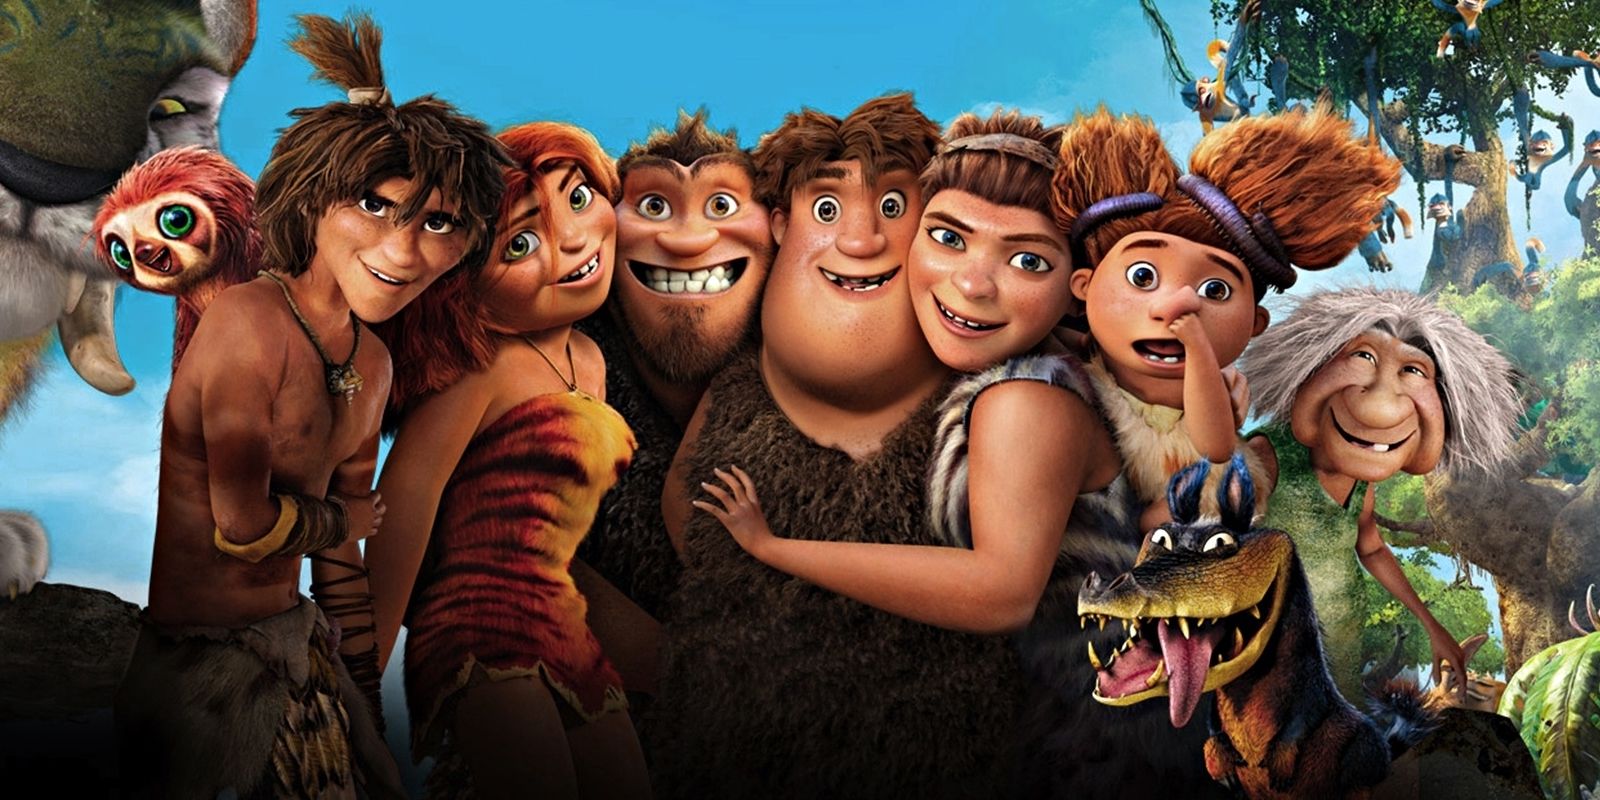 The characters of Dreamworks The Croods